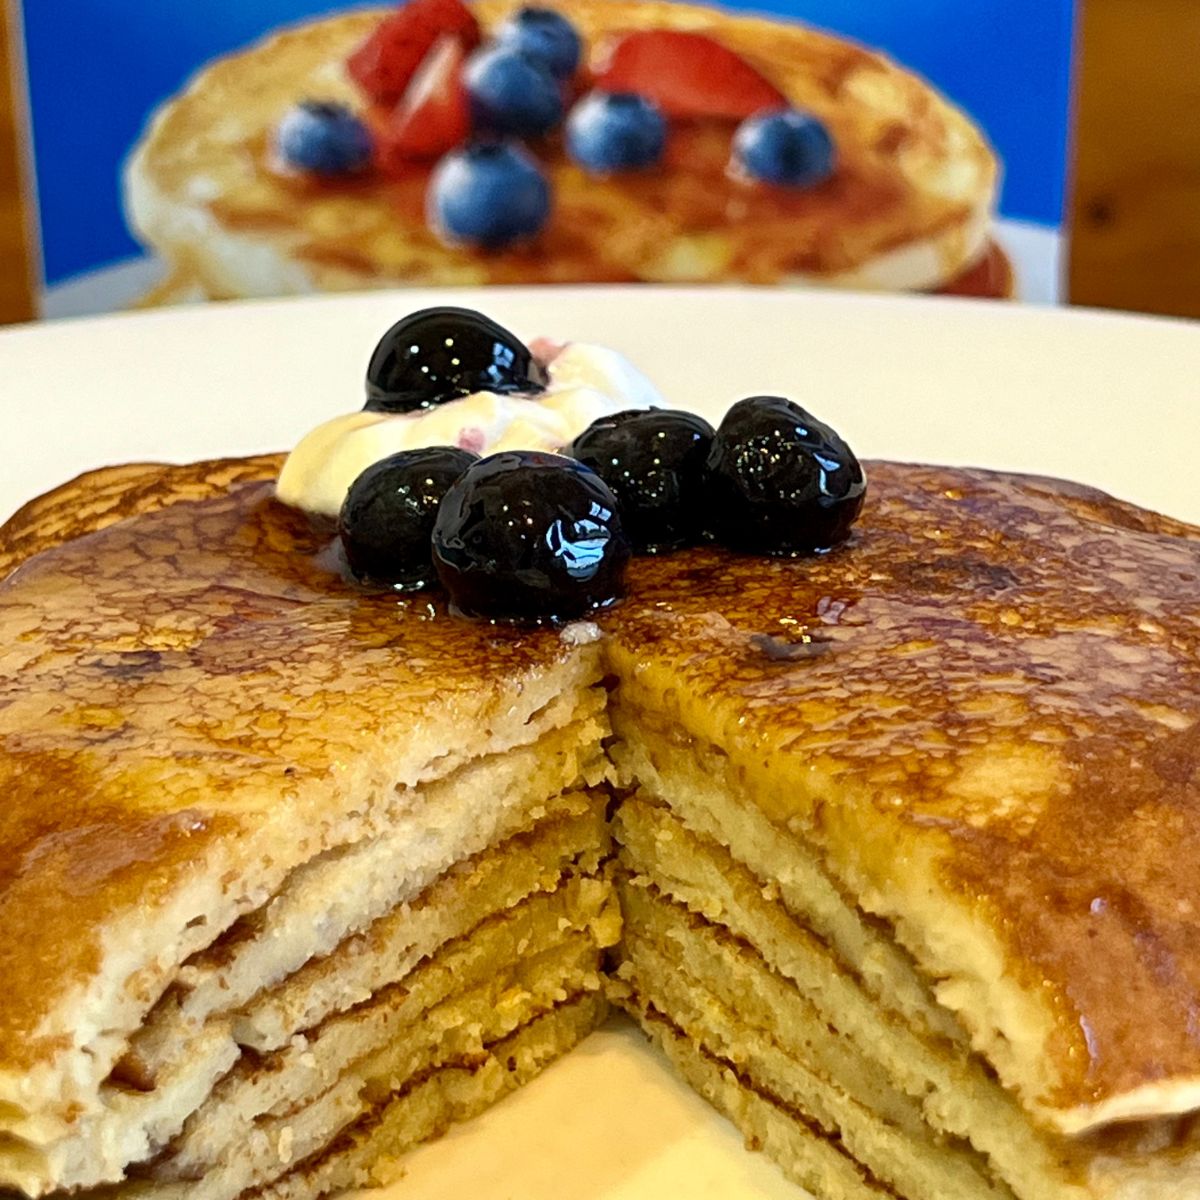 A stack of Krusteaz Buttermilk pancakes with blueberries and whipped cream on top